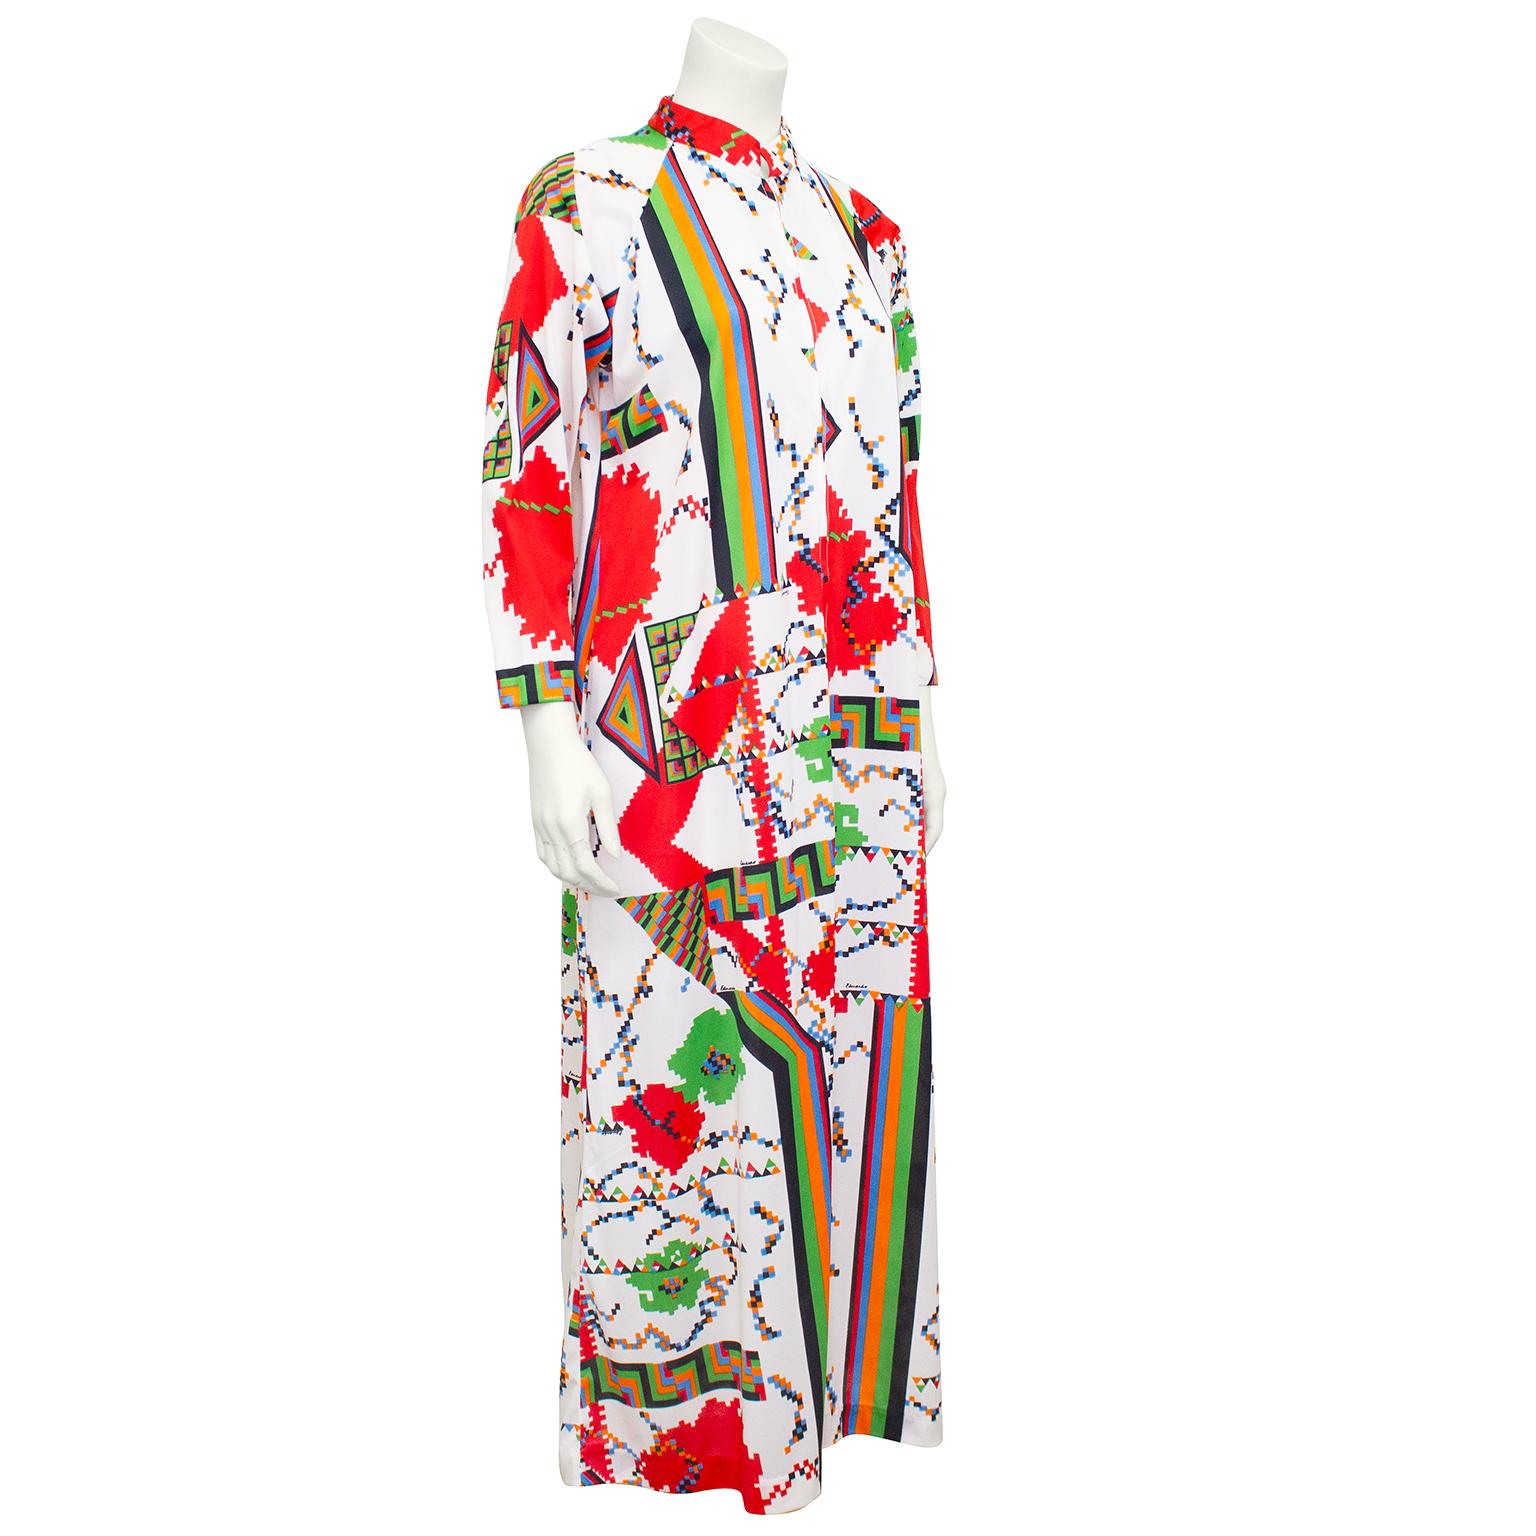 1970s polyester printed maxi hostess robe by the Italian designer Eduardo for Saks Fifth Ave. Mandarin neckline with zipper at centre front. Long sleeve and wide through body, giving it a kaftan shape. All over white, green, blue, orange and black